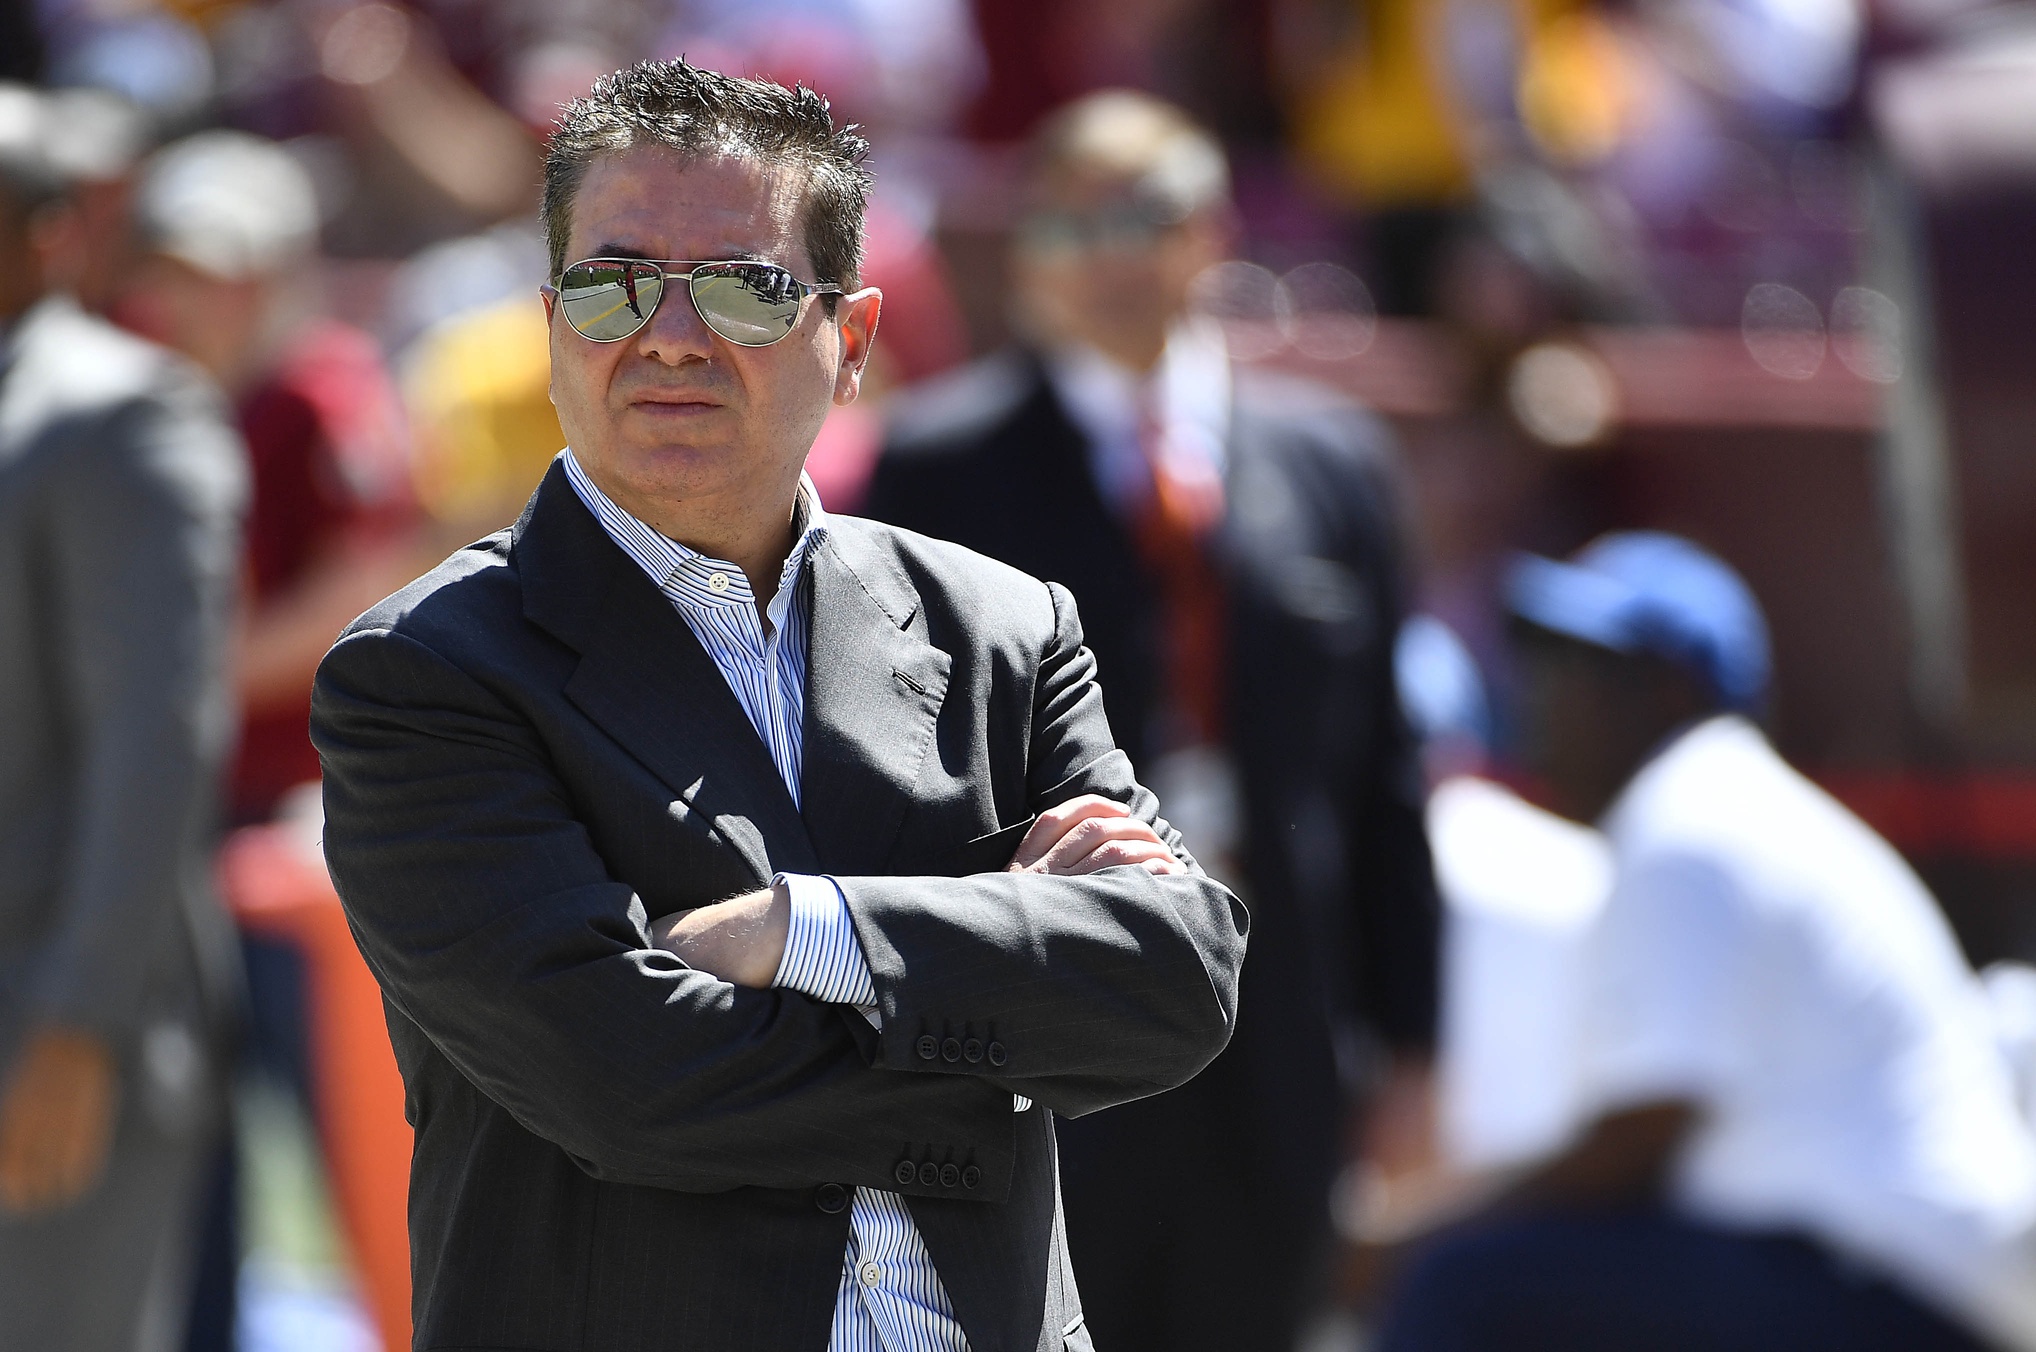 Who Is Dan Snyder? Washington Commanders Owner Embroiled in Constant Scandal